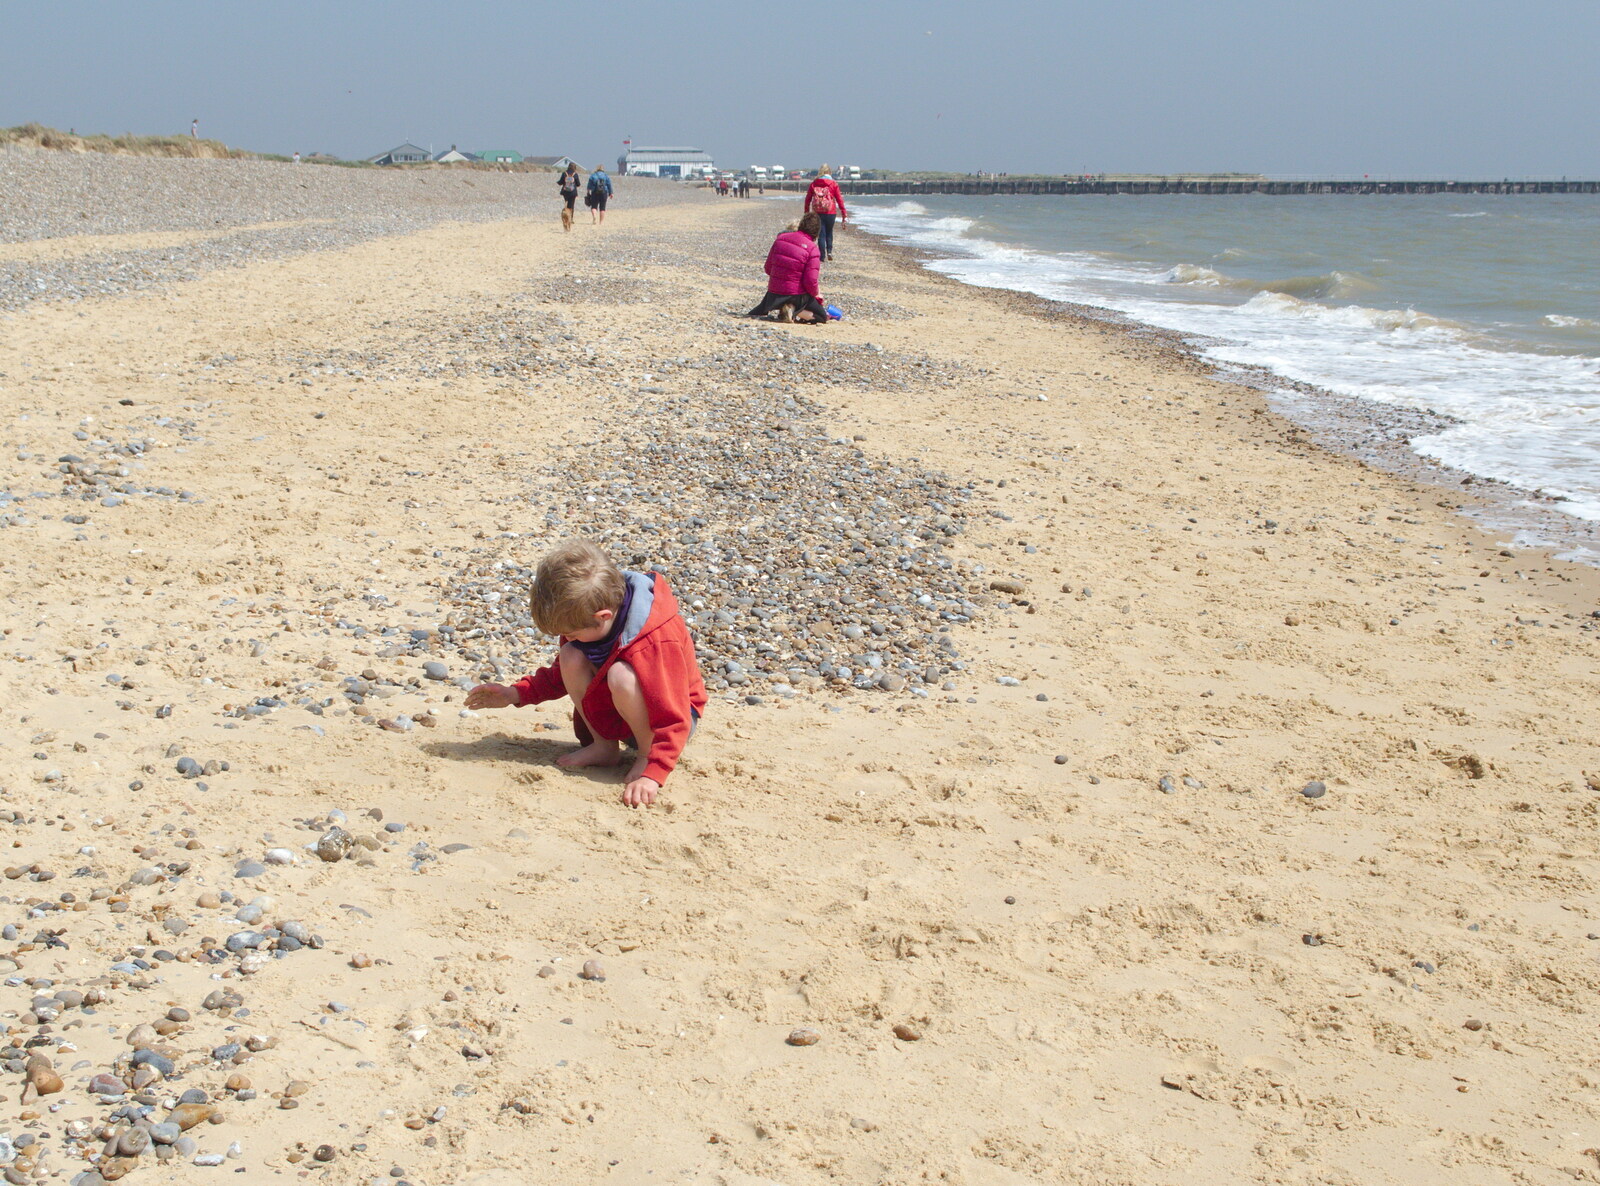 Fred digs around on the beach from Life's A Windy Beach, Walberswick, Suffolk - 5th May 2014